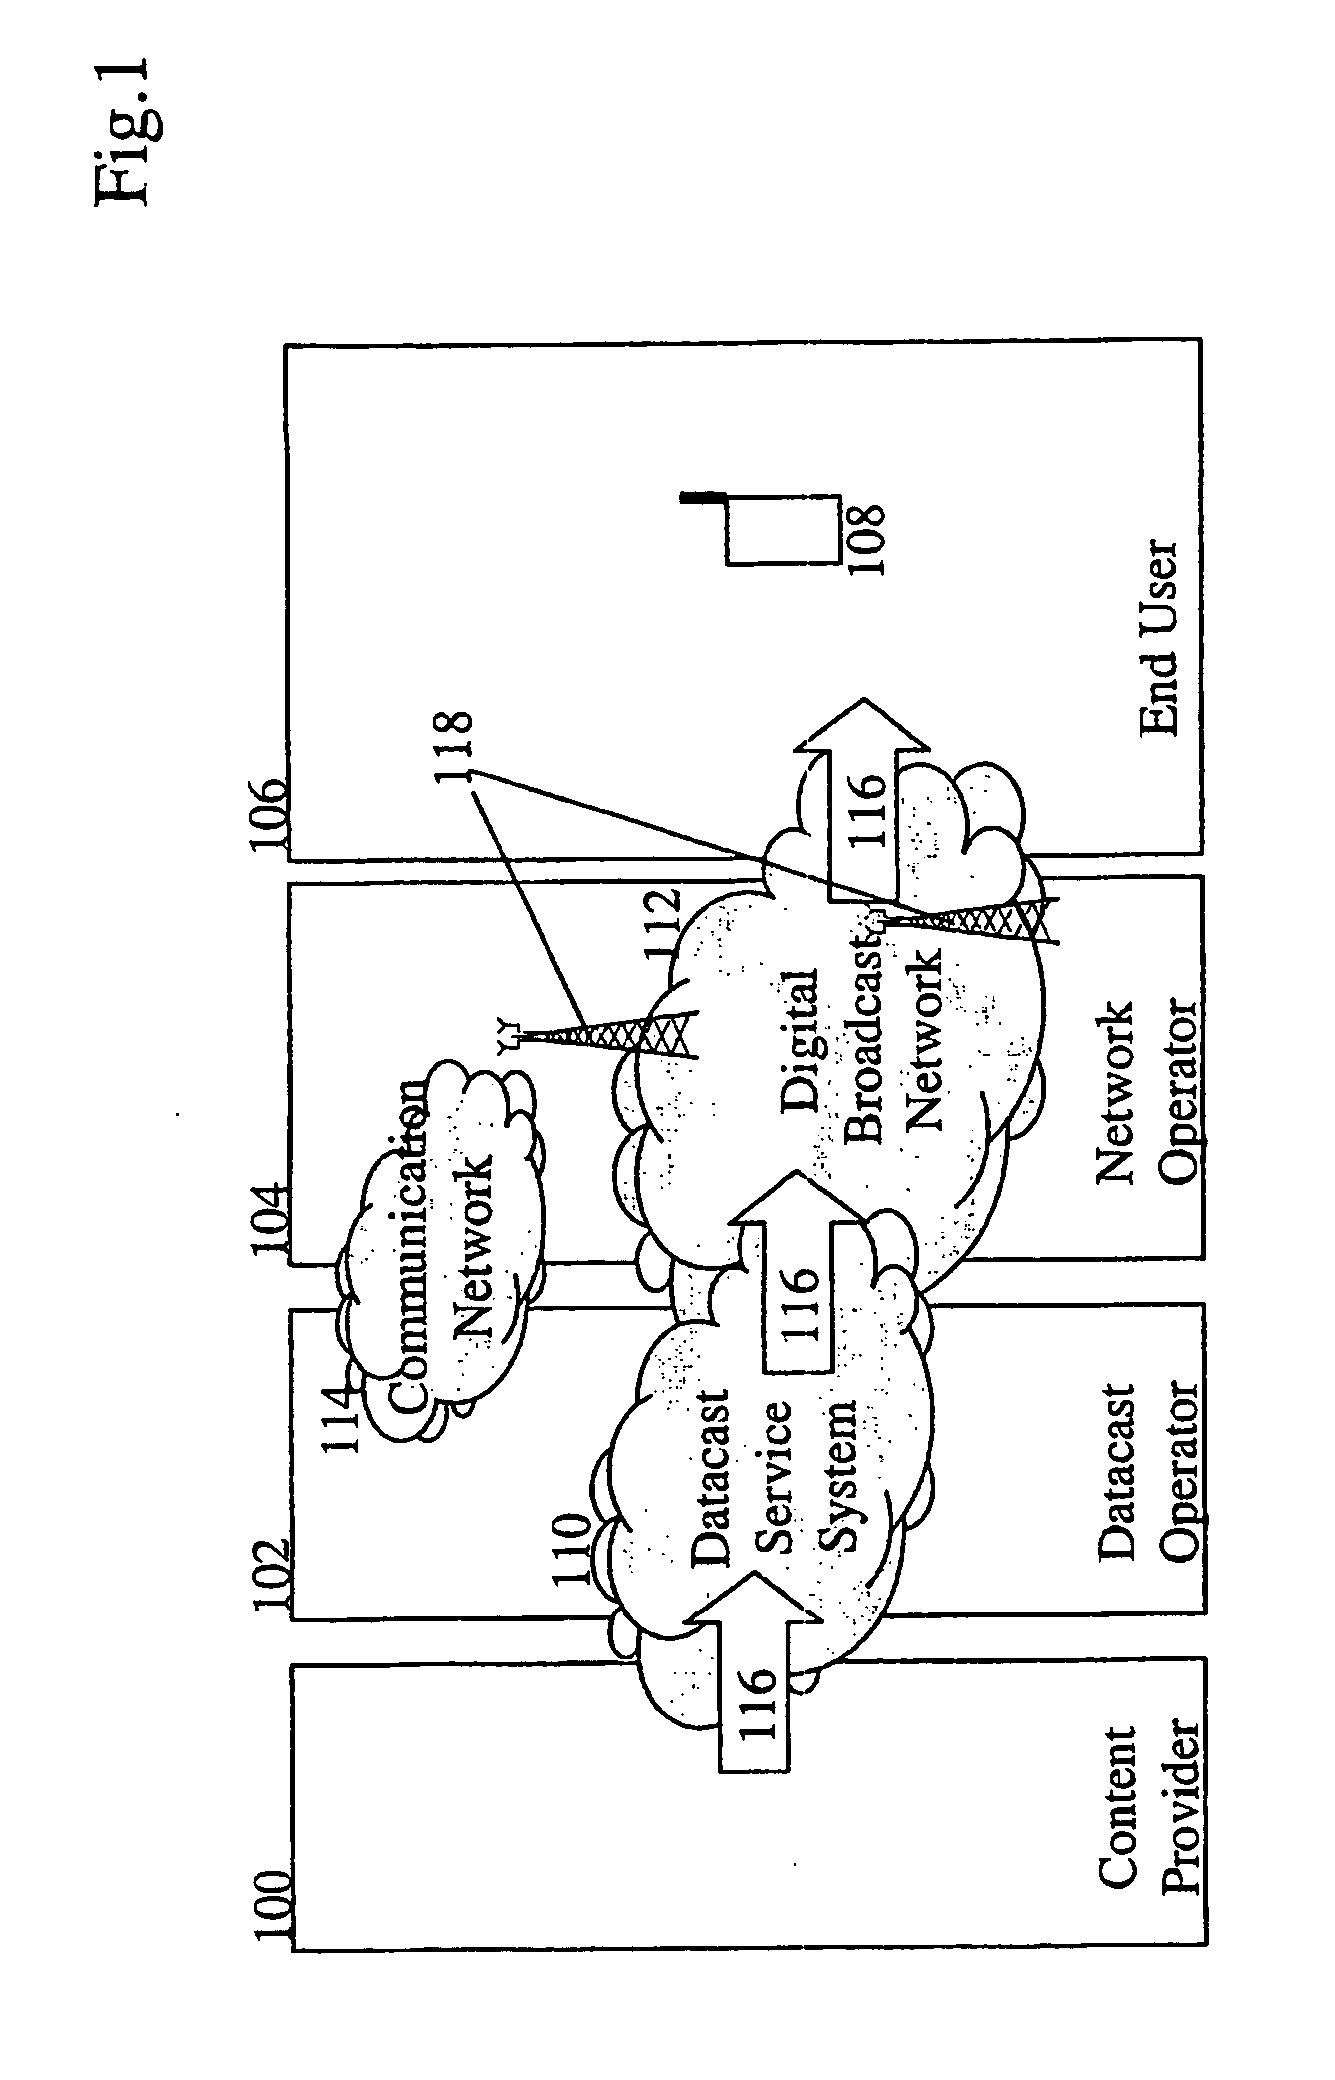 Method and a system for communicating bandwidth information of a digital broadcast network